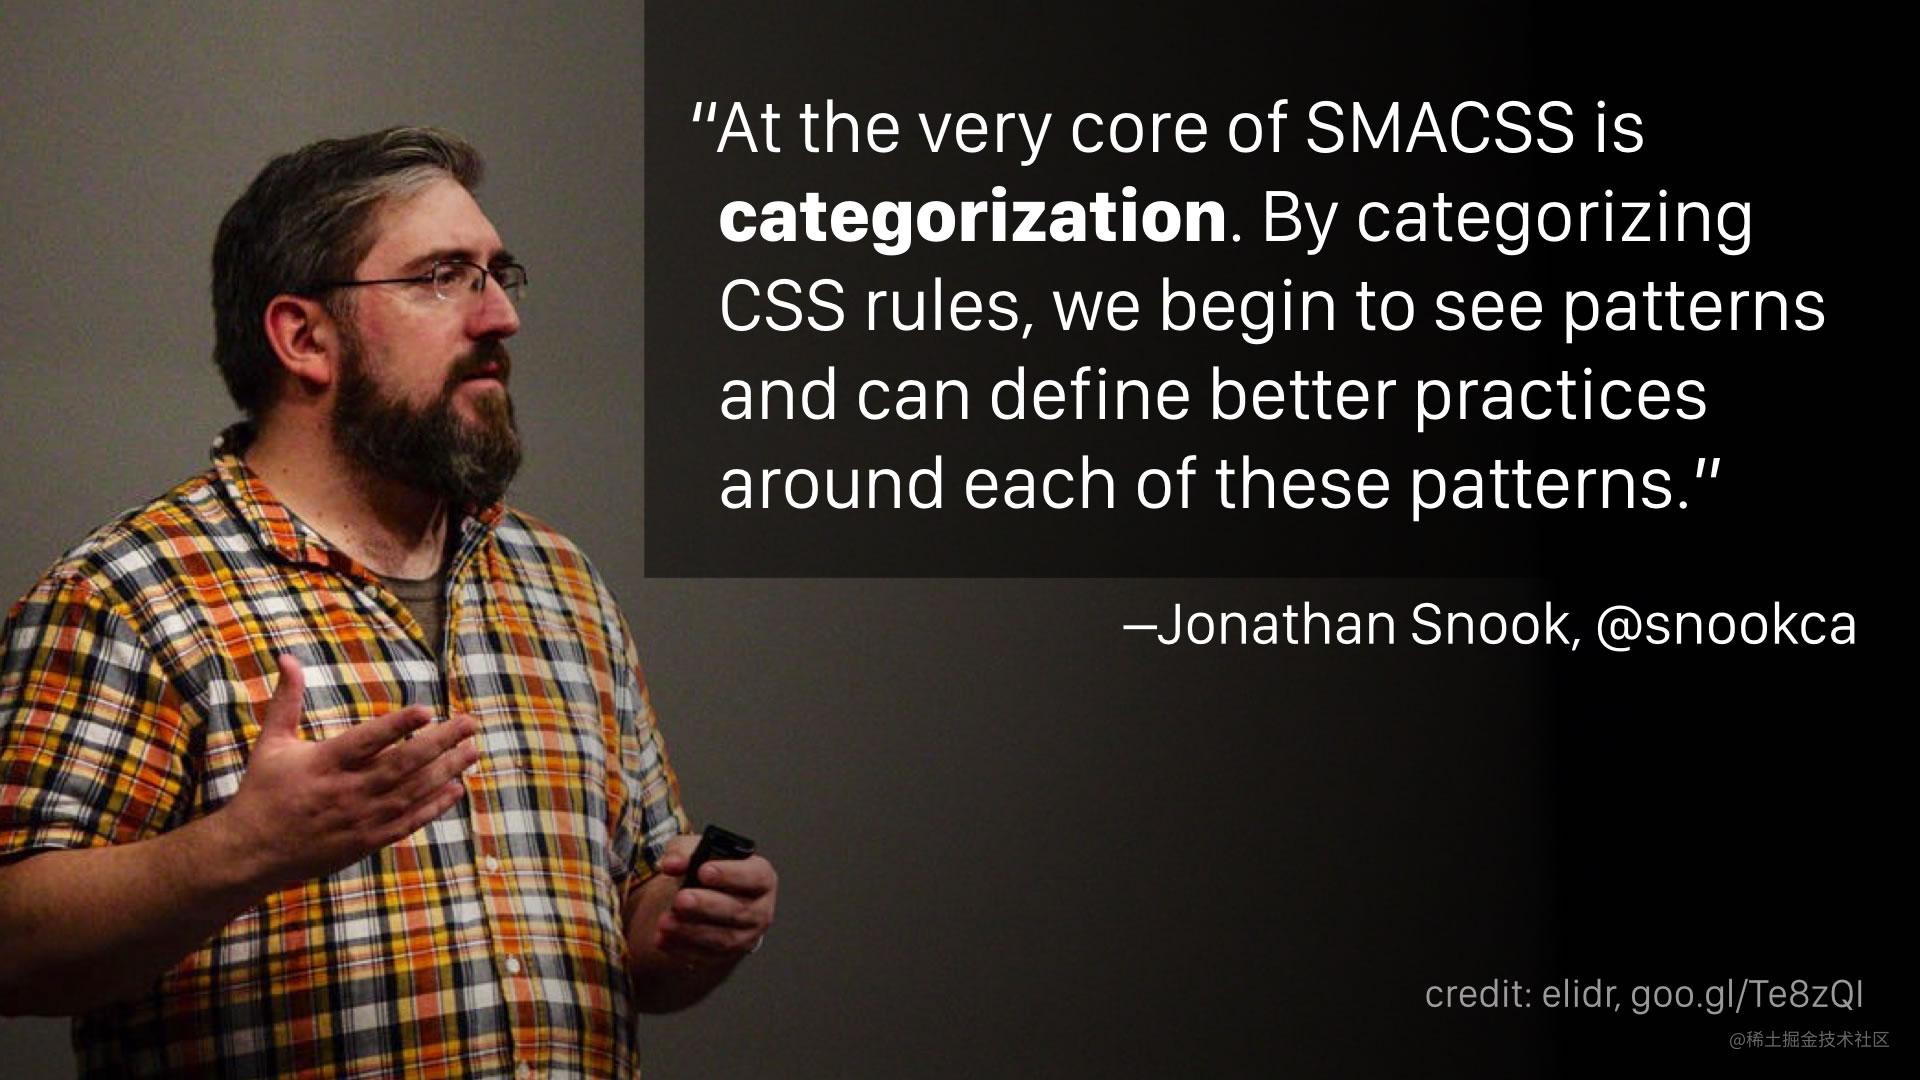 “At the very core of SMACSS is categorization. By categorizing CSS rules, we begin to see patterns and can define better practices around each of these patterns.” —Jonathan Snook